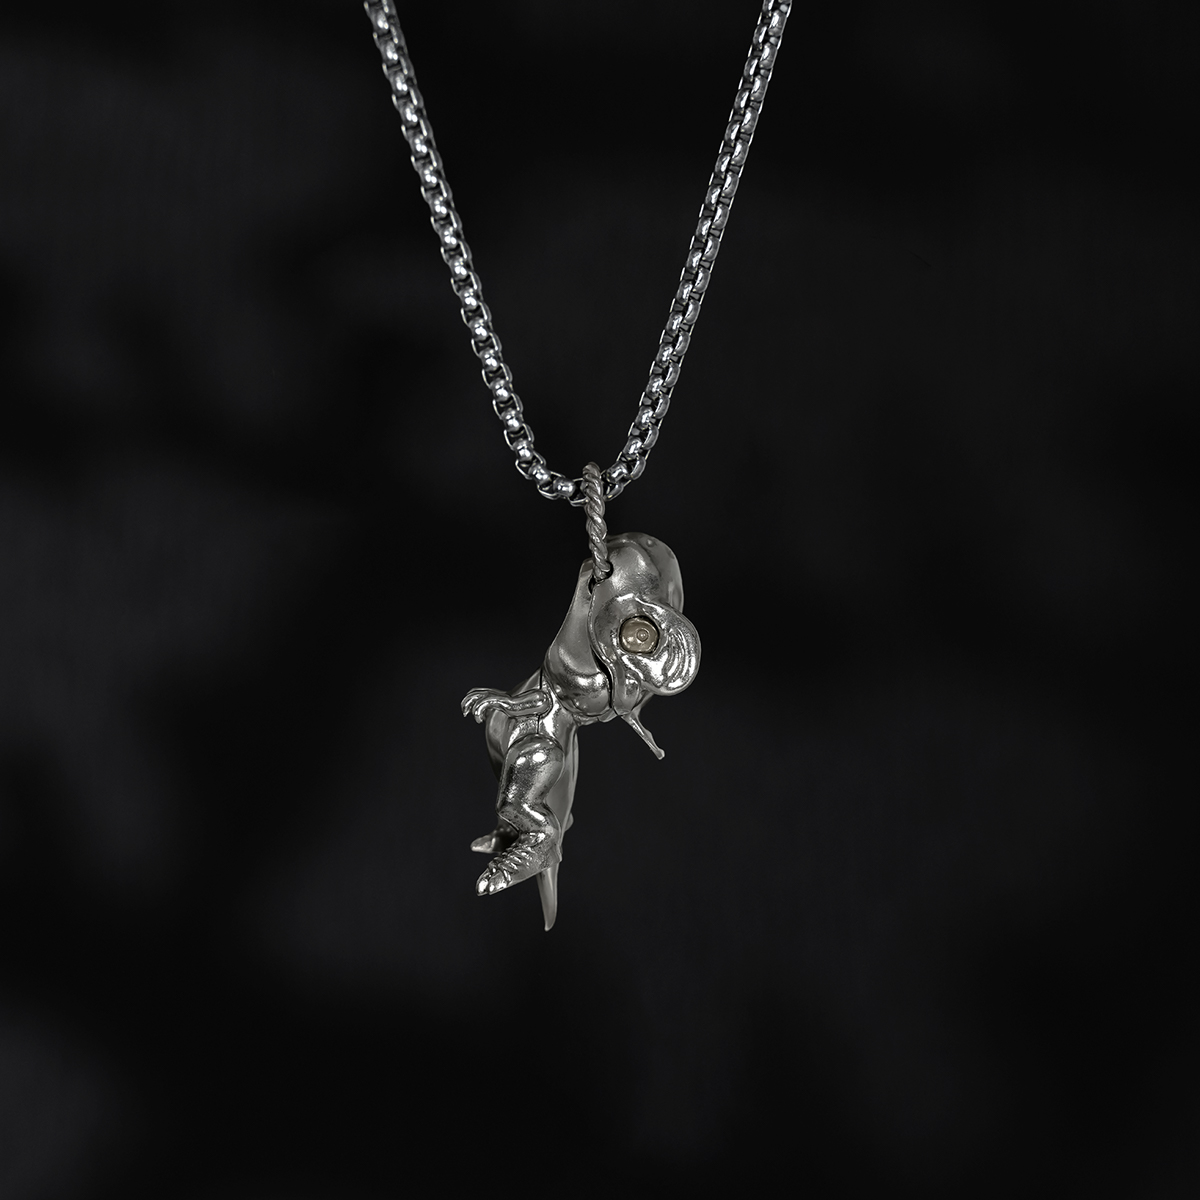 S925 Silver Artistic Dinosaur Retro Pendant with Moveable Limbs and Biteable Mouth